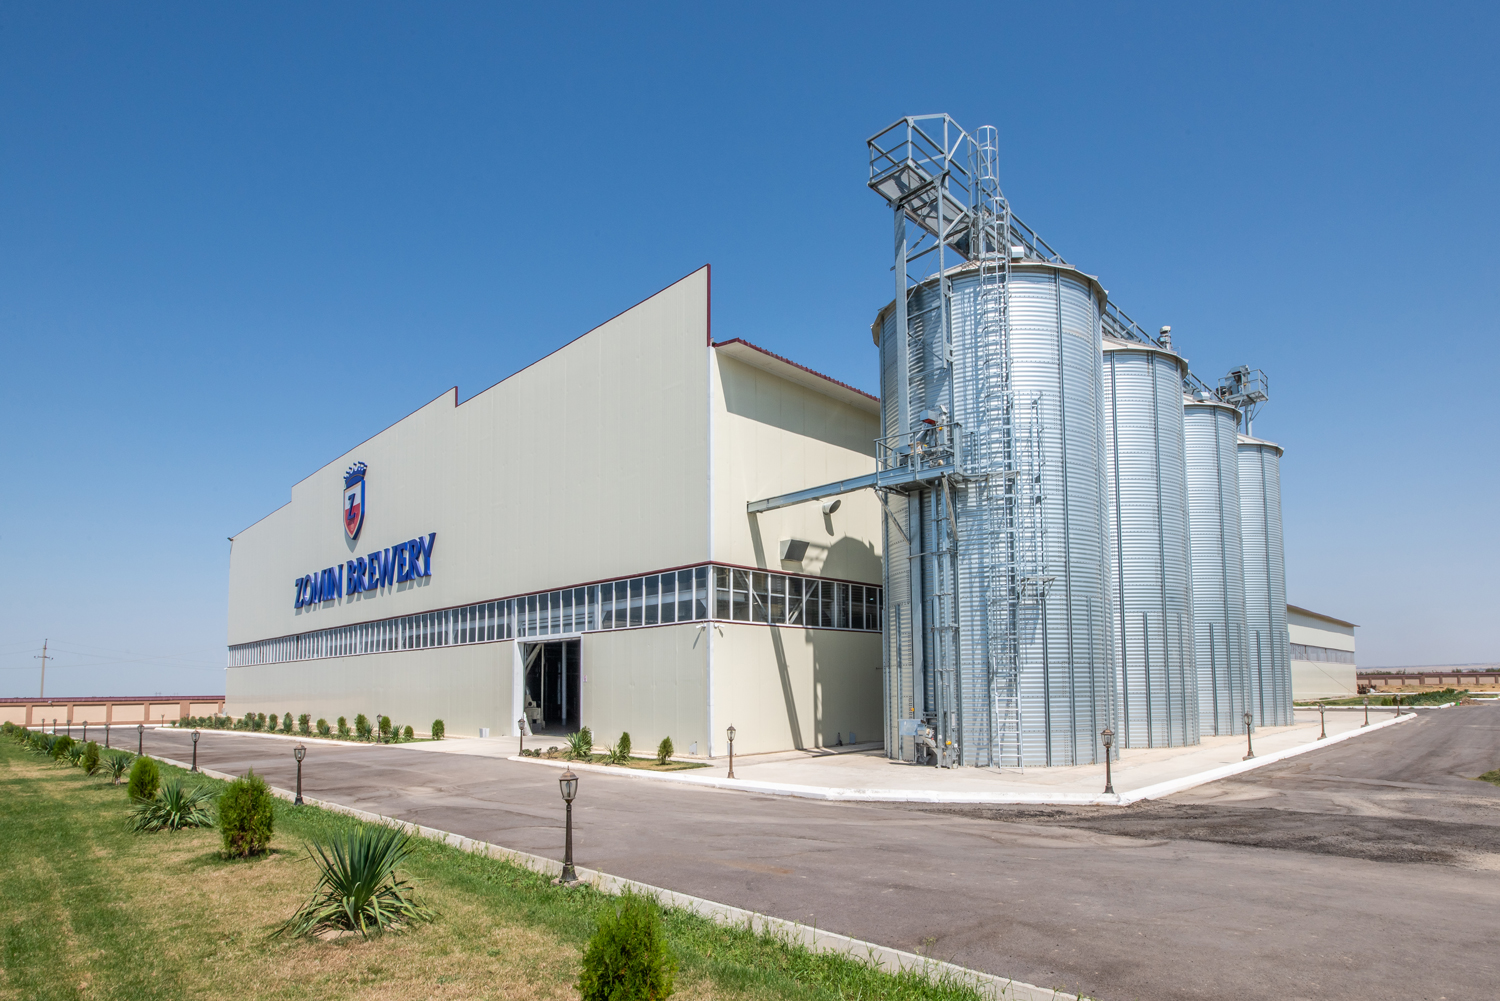 Zomin Brewery – Uzbekistan’s largest brewery in picturesque surroundings